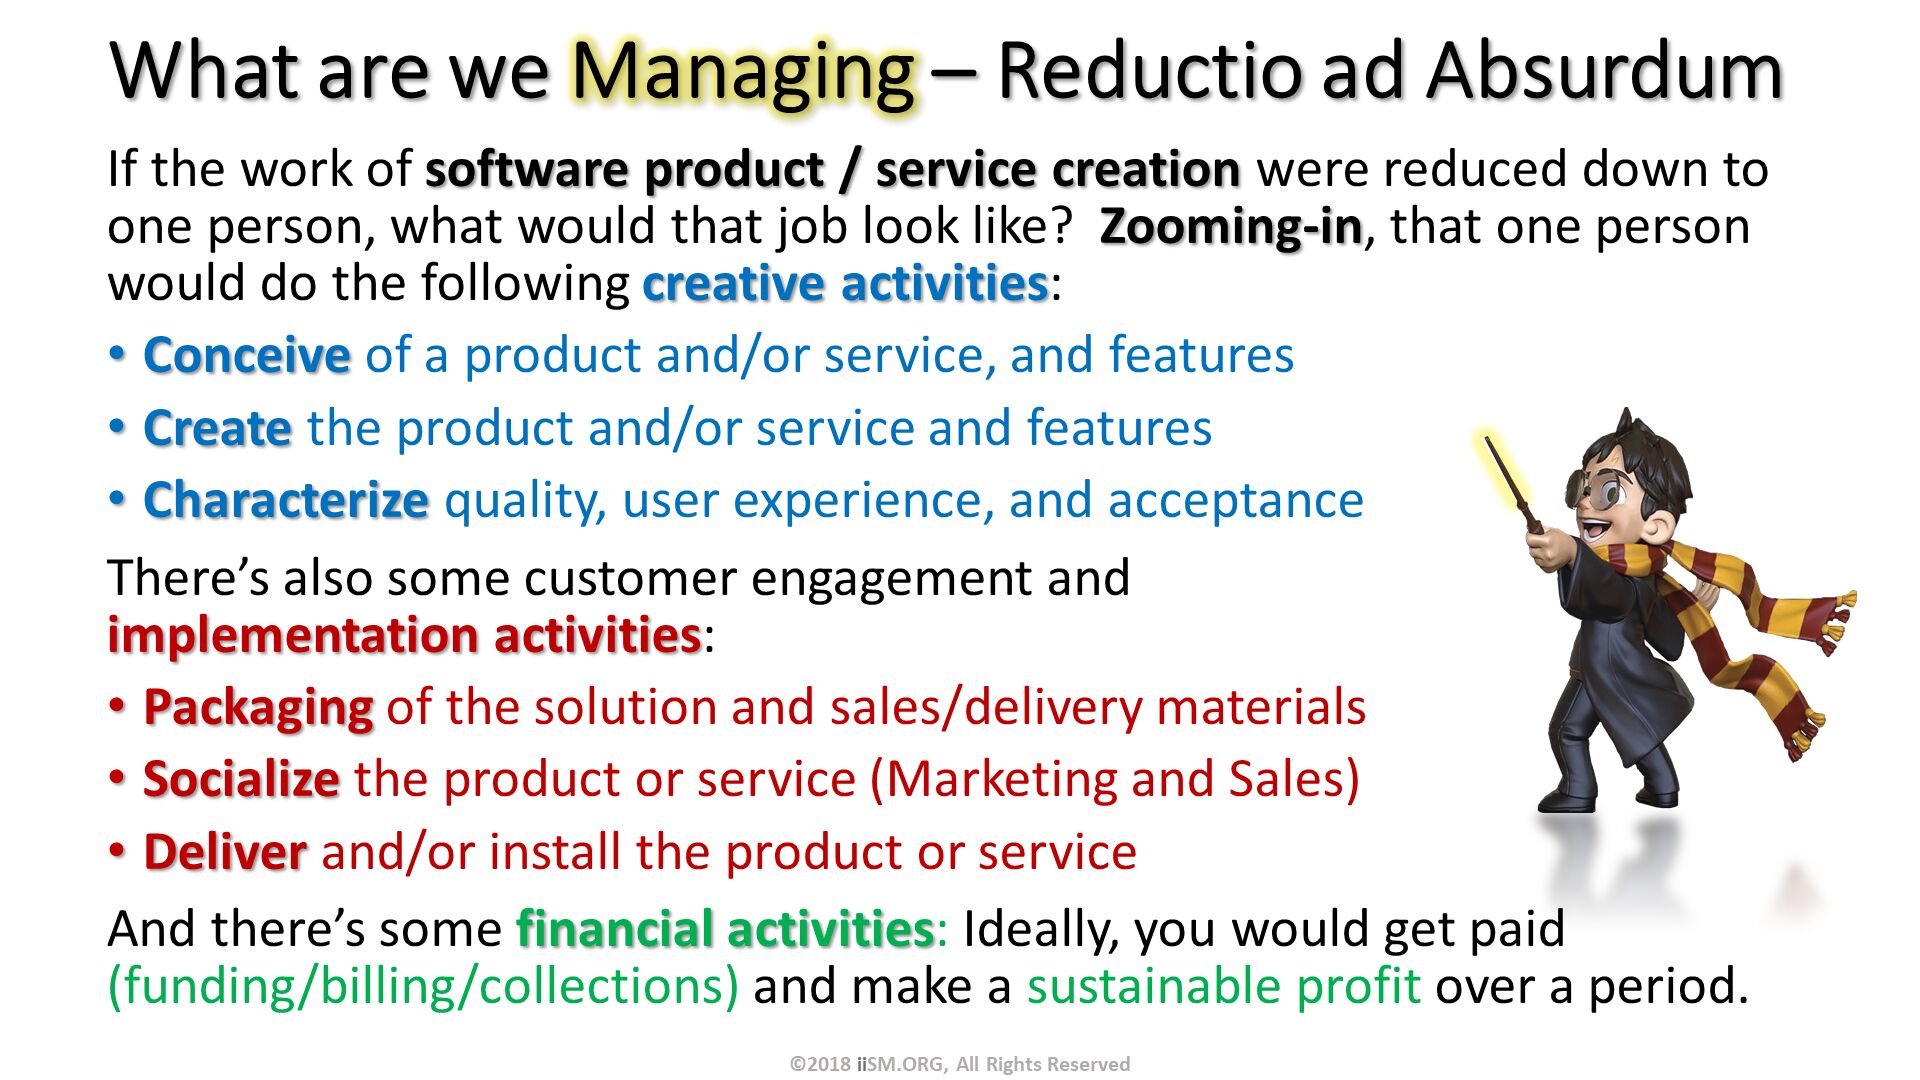 What are we Managing – Reductio ad Absurdum. If the work of software product / service creation were reduced down to one person, what would that job look like?  Zooming-in, that one person would do the following creative activities:
Conceive of a product and/or service, and features
Create the product and/or service and features
Characterize quality, user experience, and acceptance
There’s also some customer engagement andimplementation activities:
Packaging of the solution and sales/delivery materials
Socialize the product or service (Marketing and Sales)
Deliver and/or install the product or service
And there’s some financial activities: Ideally, you would get paid (funding/billing/collections) and make a sustainable profit over a period. ©2018 iiSM.ORG, All Rights Reserved. 